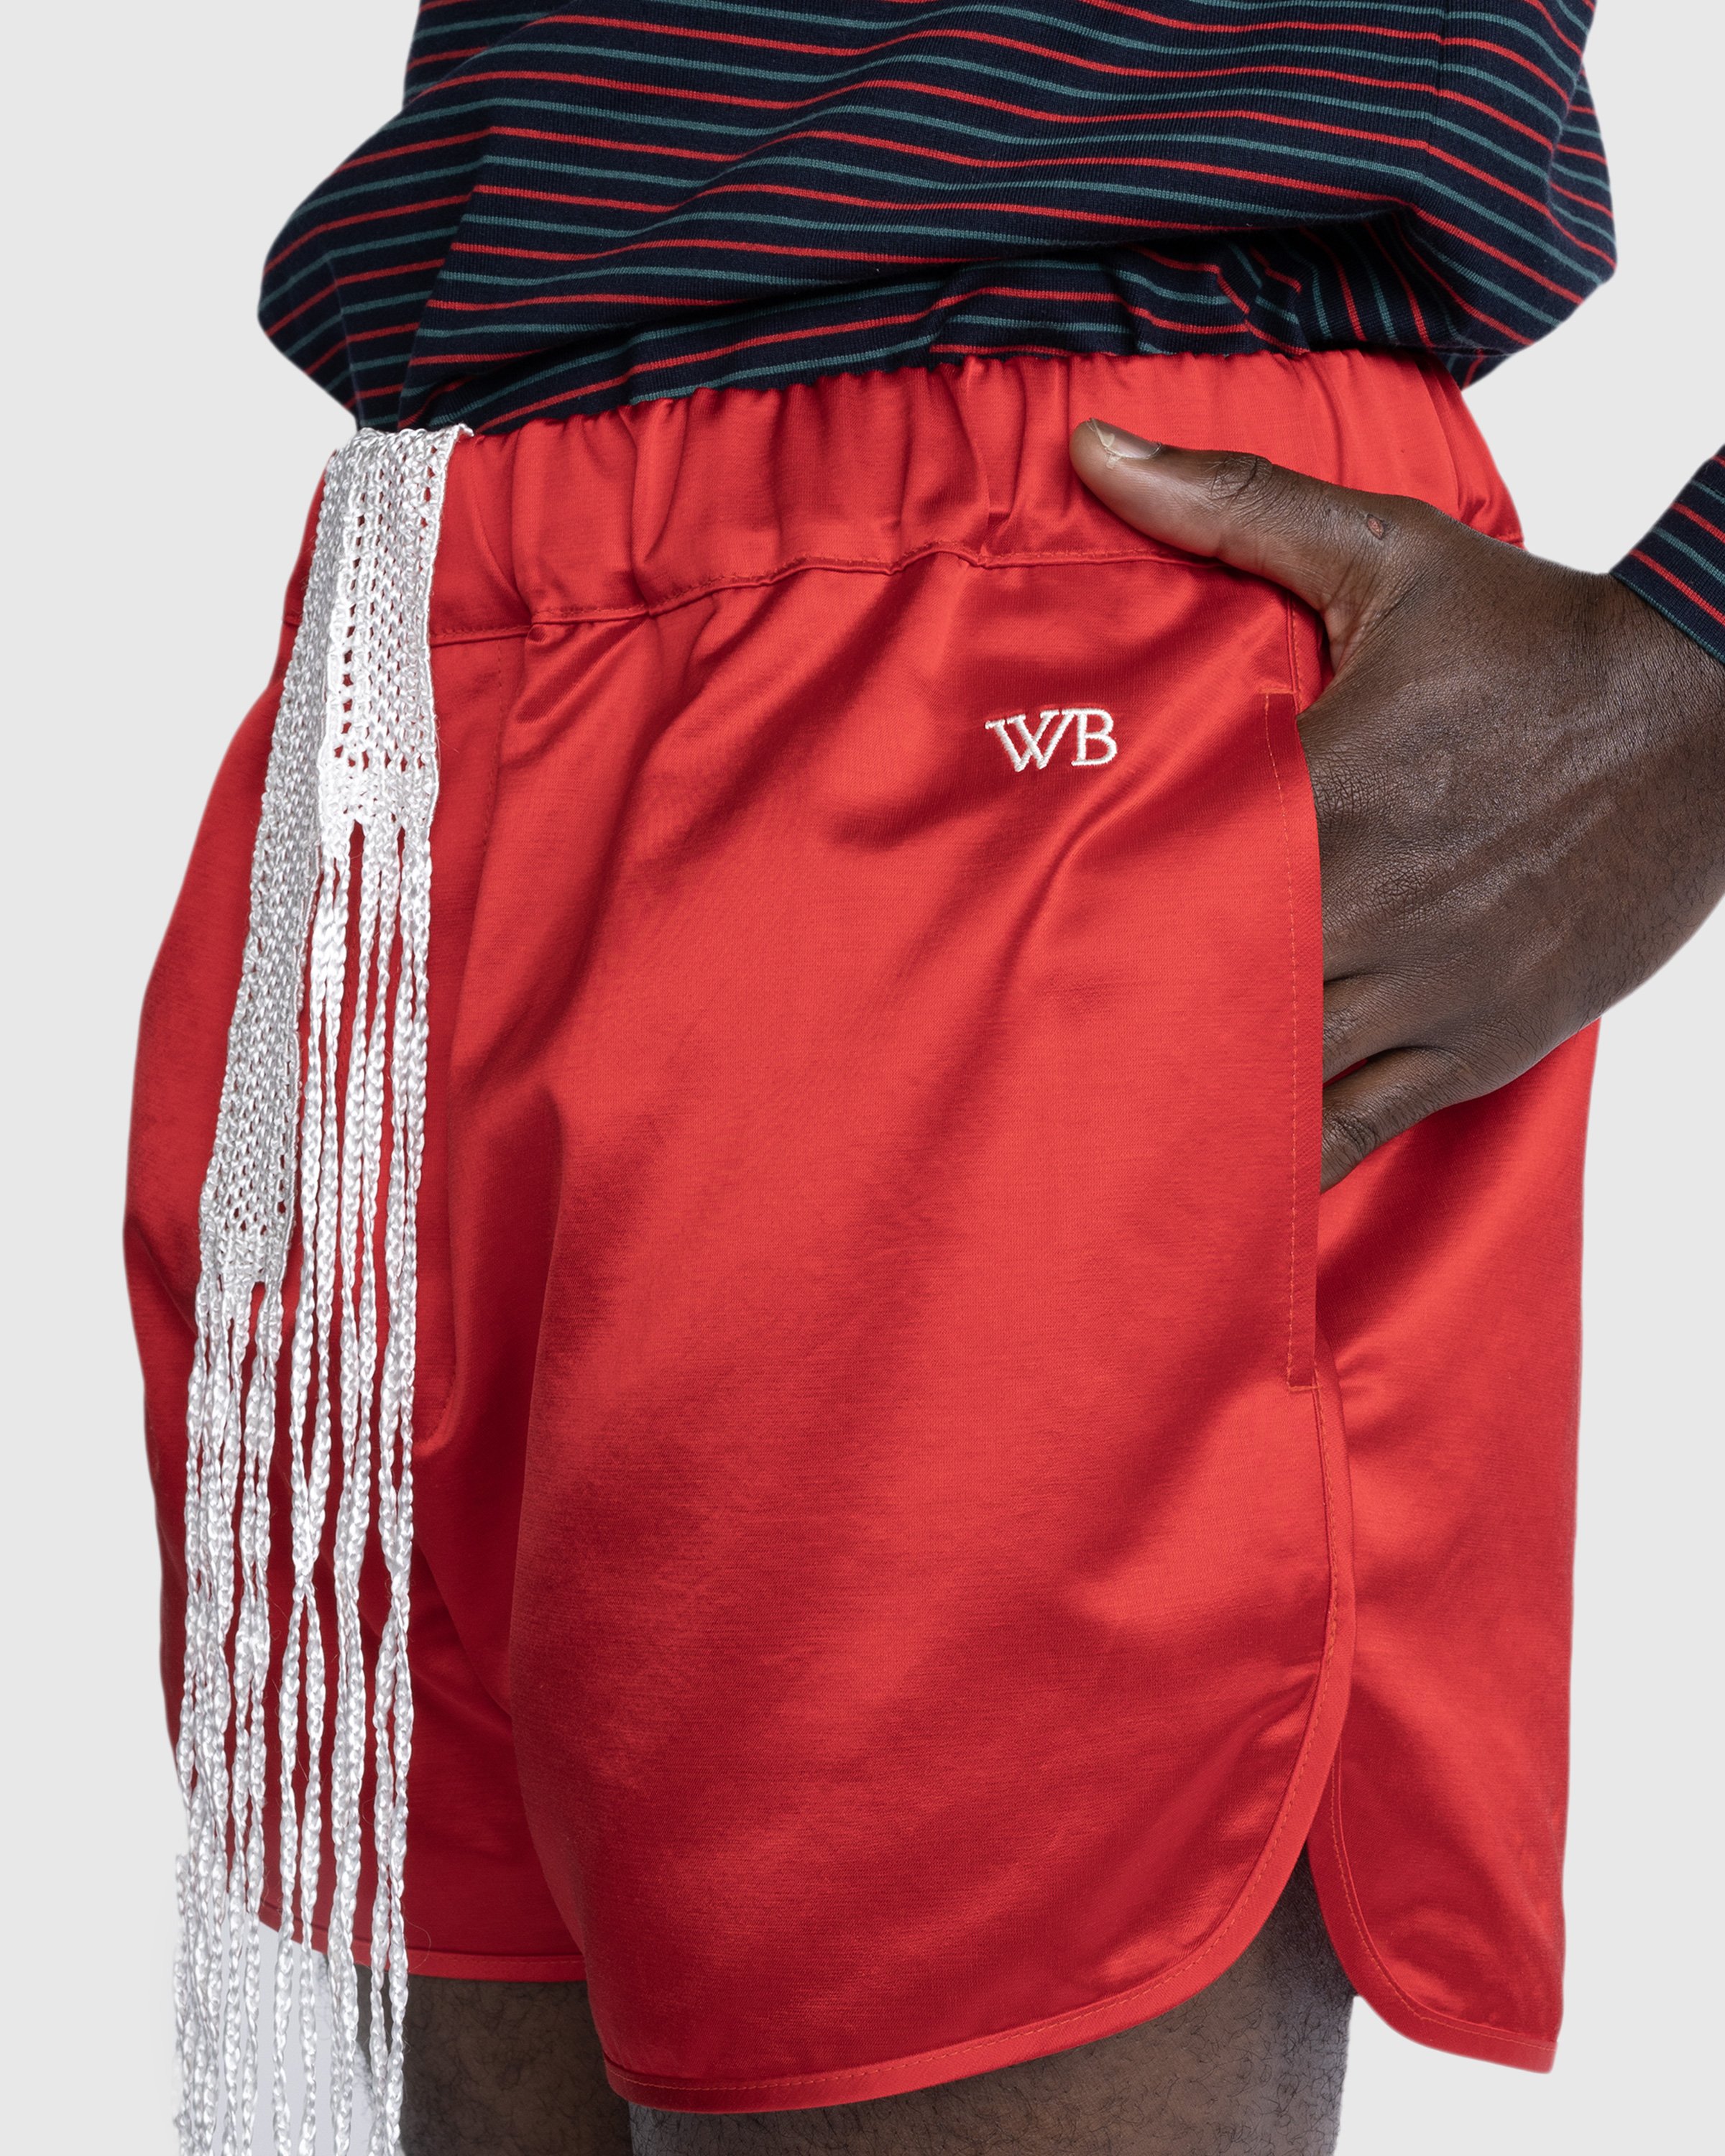 Wales Bonner - Cassette Shorts - Clothing - Red - Image 5